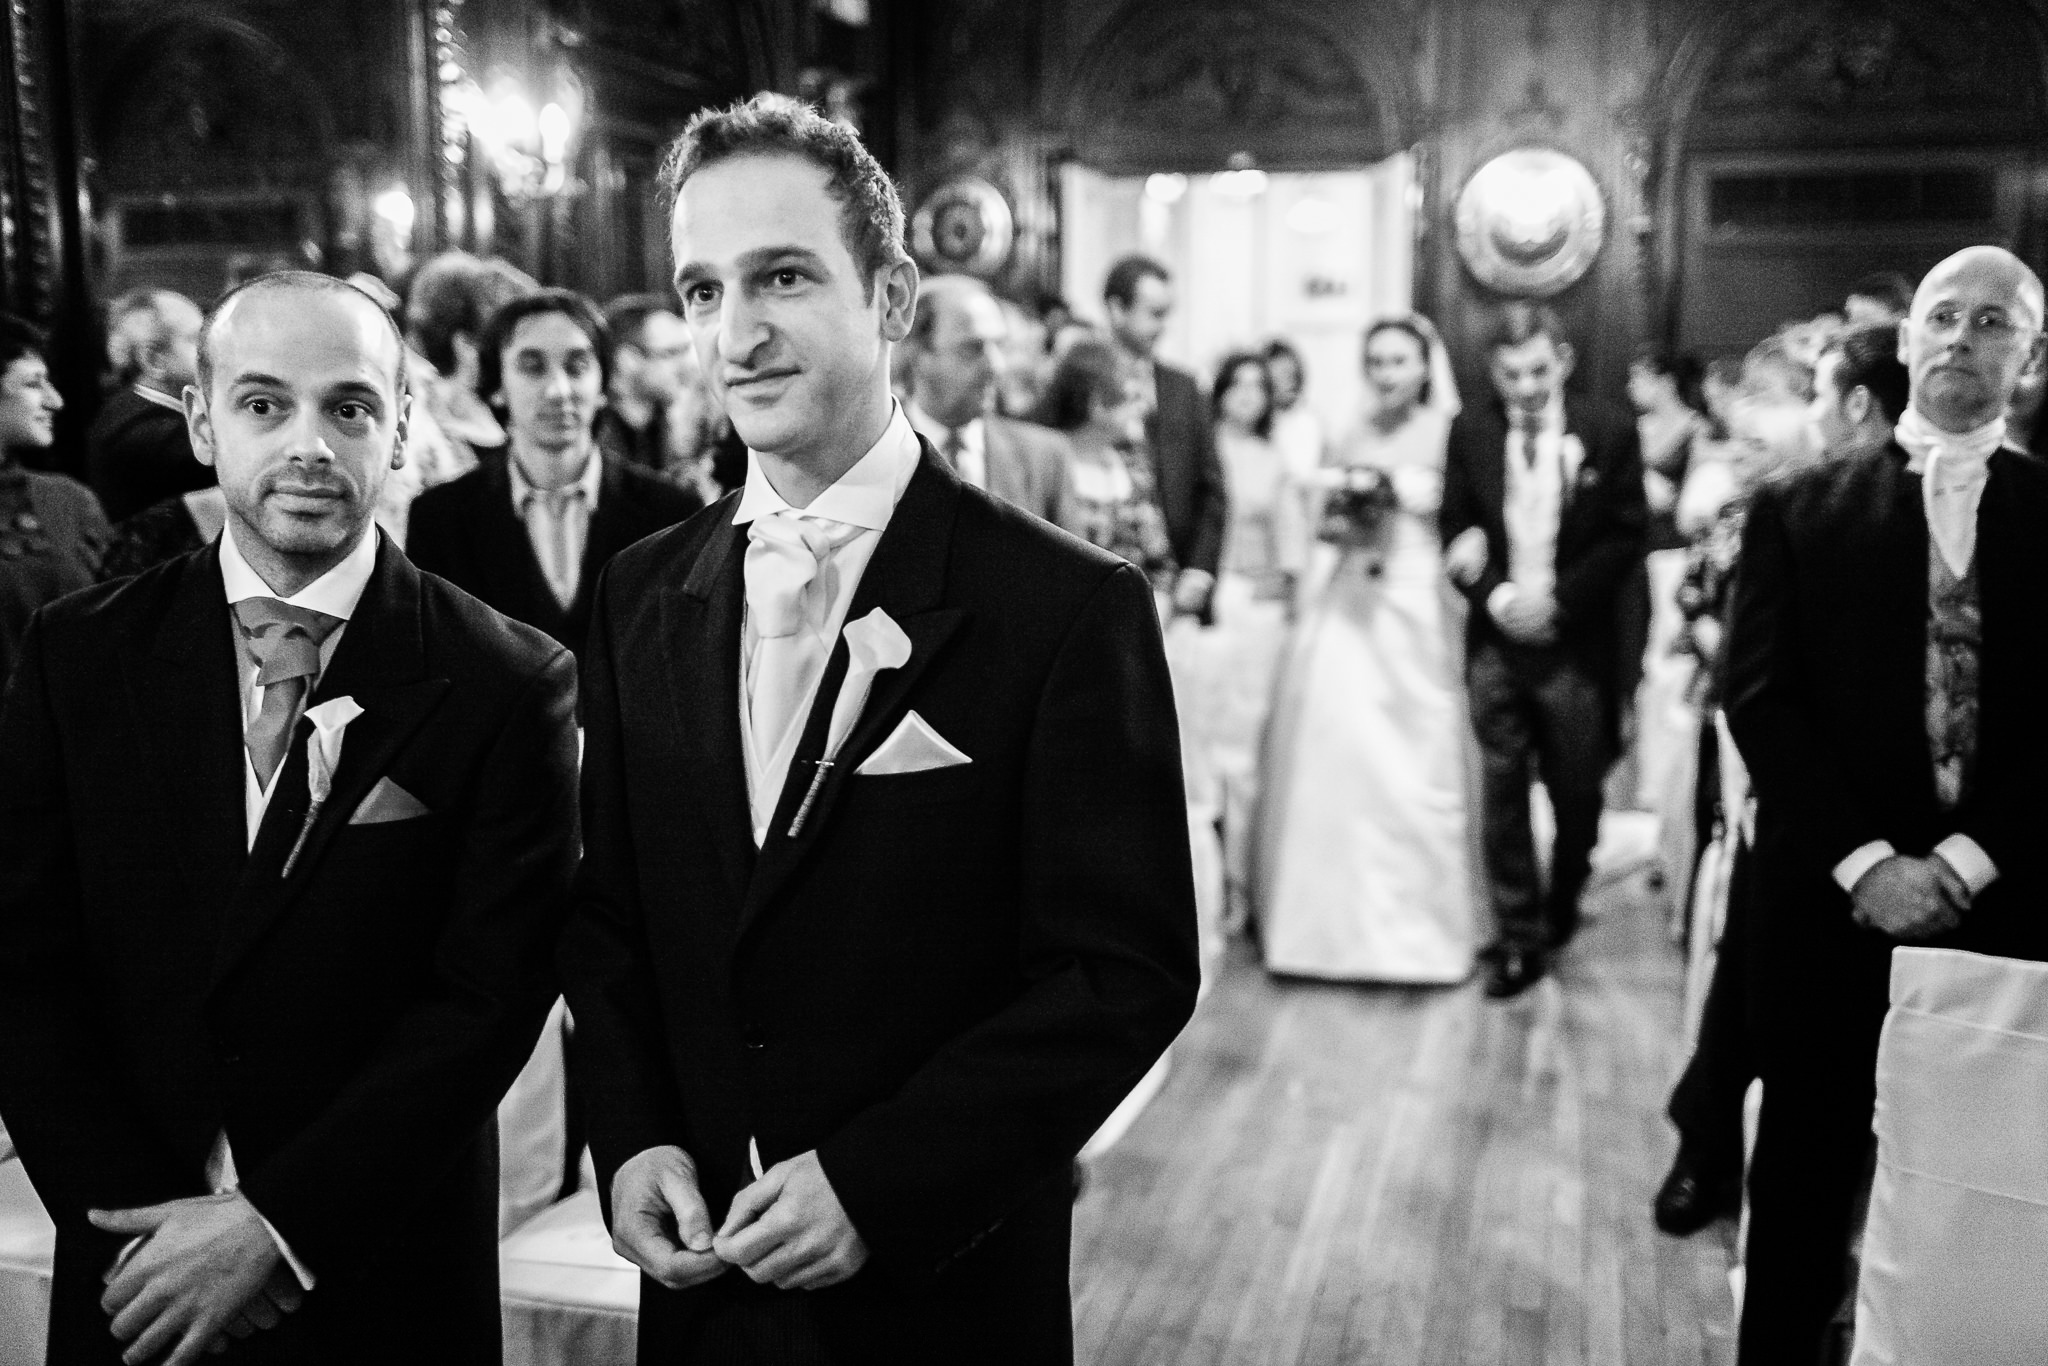 groom looks into the mirror to see the bride walking down the aisle